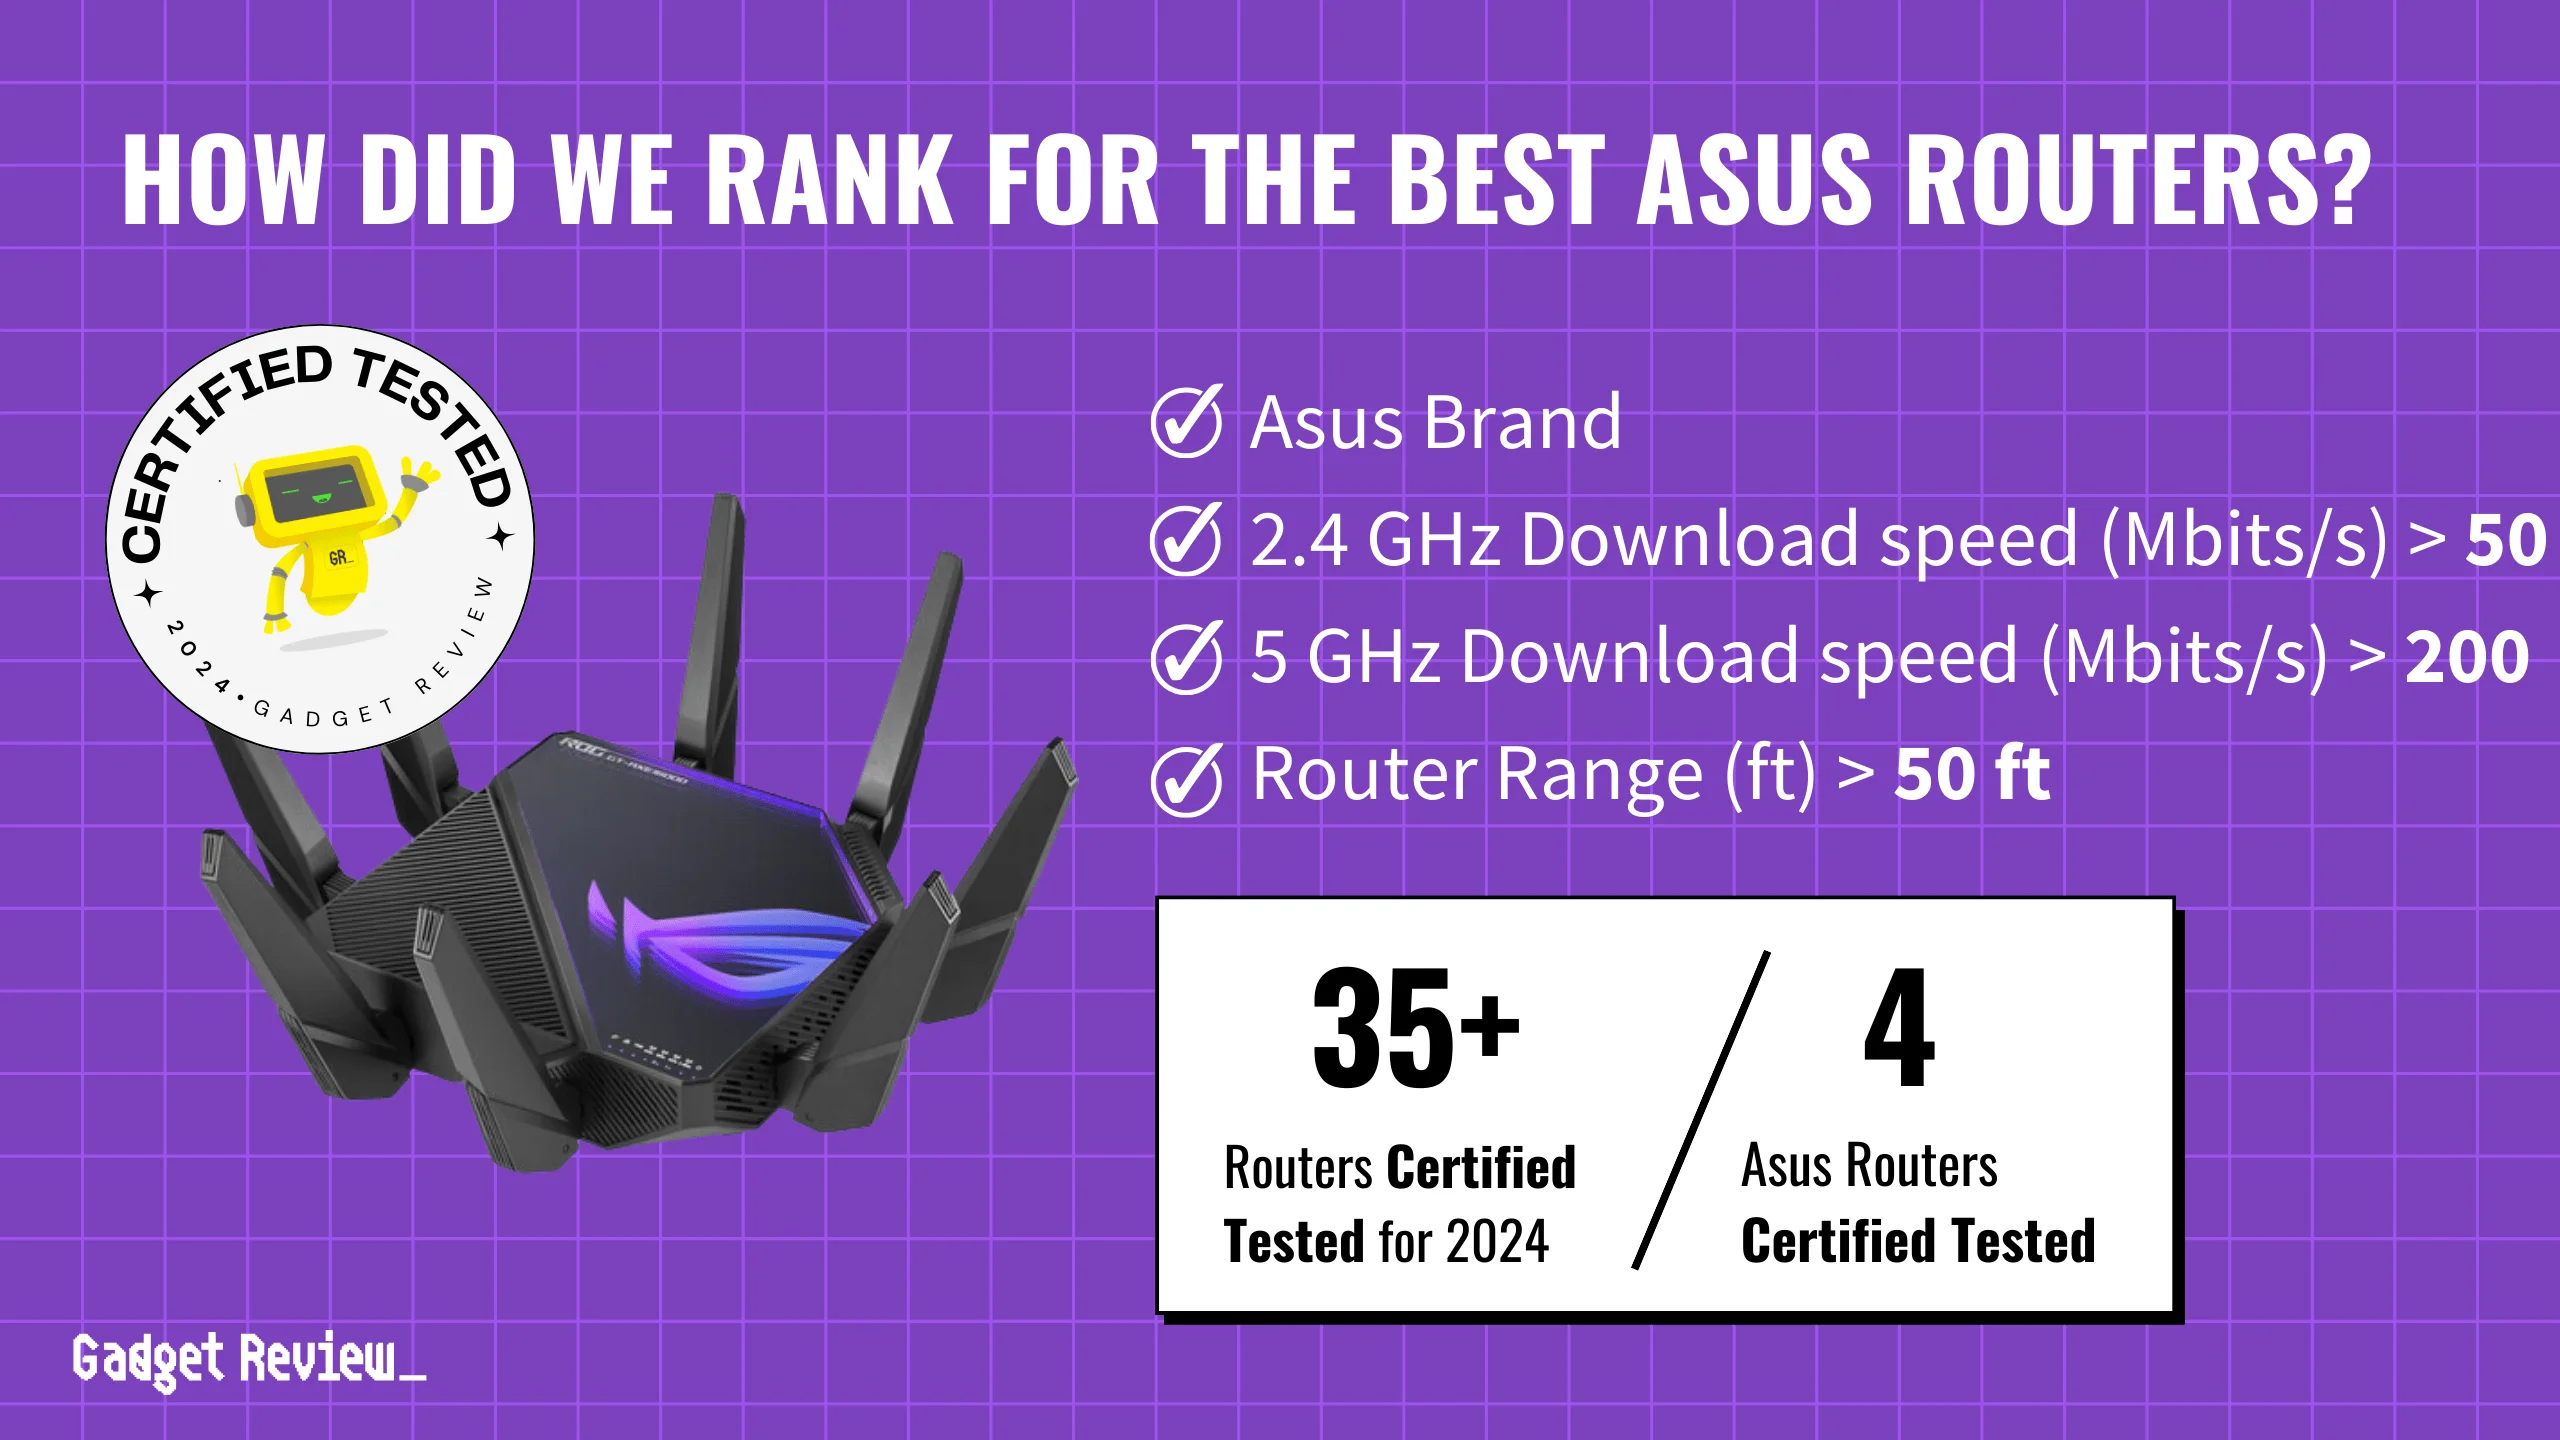 best asus routers guide that shows the top best router model